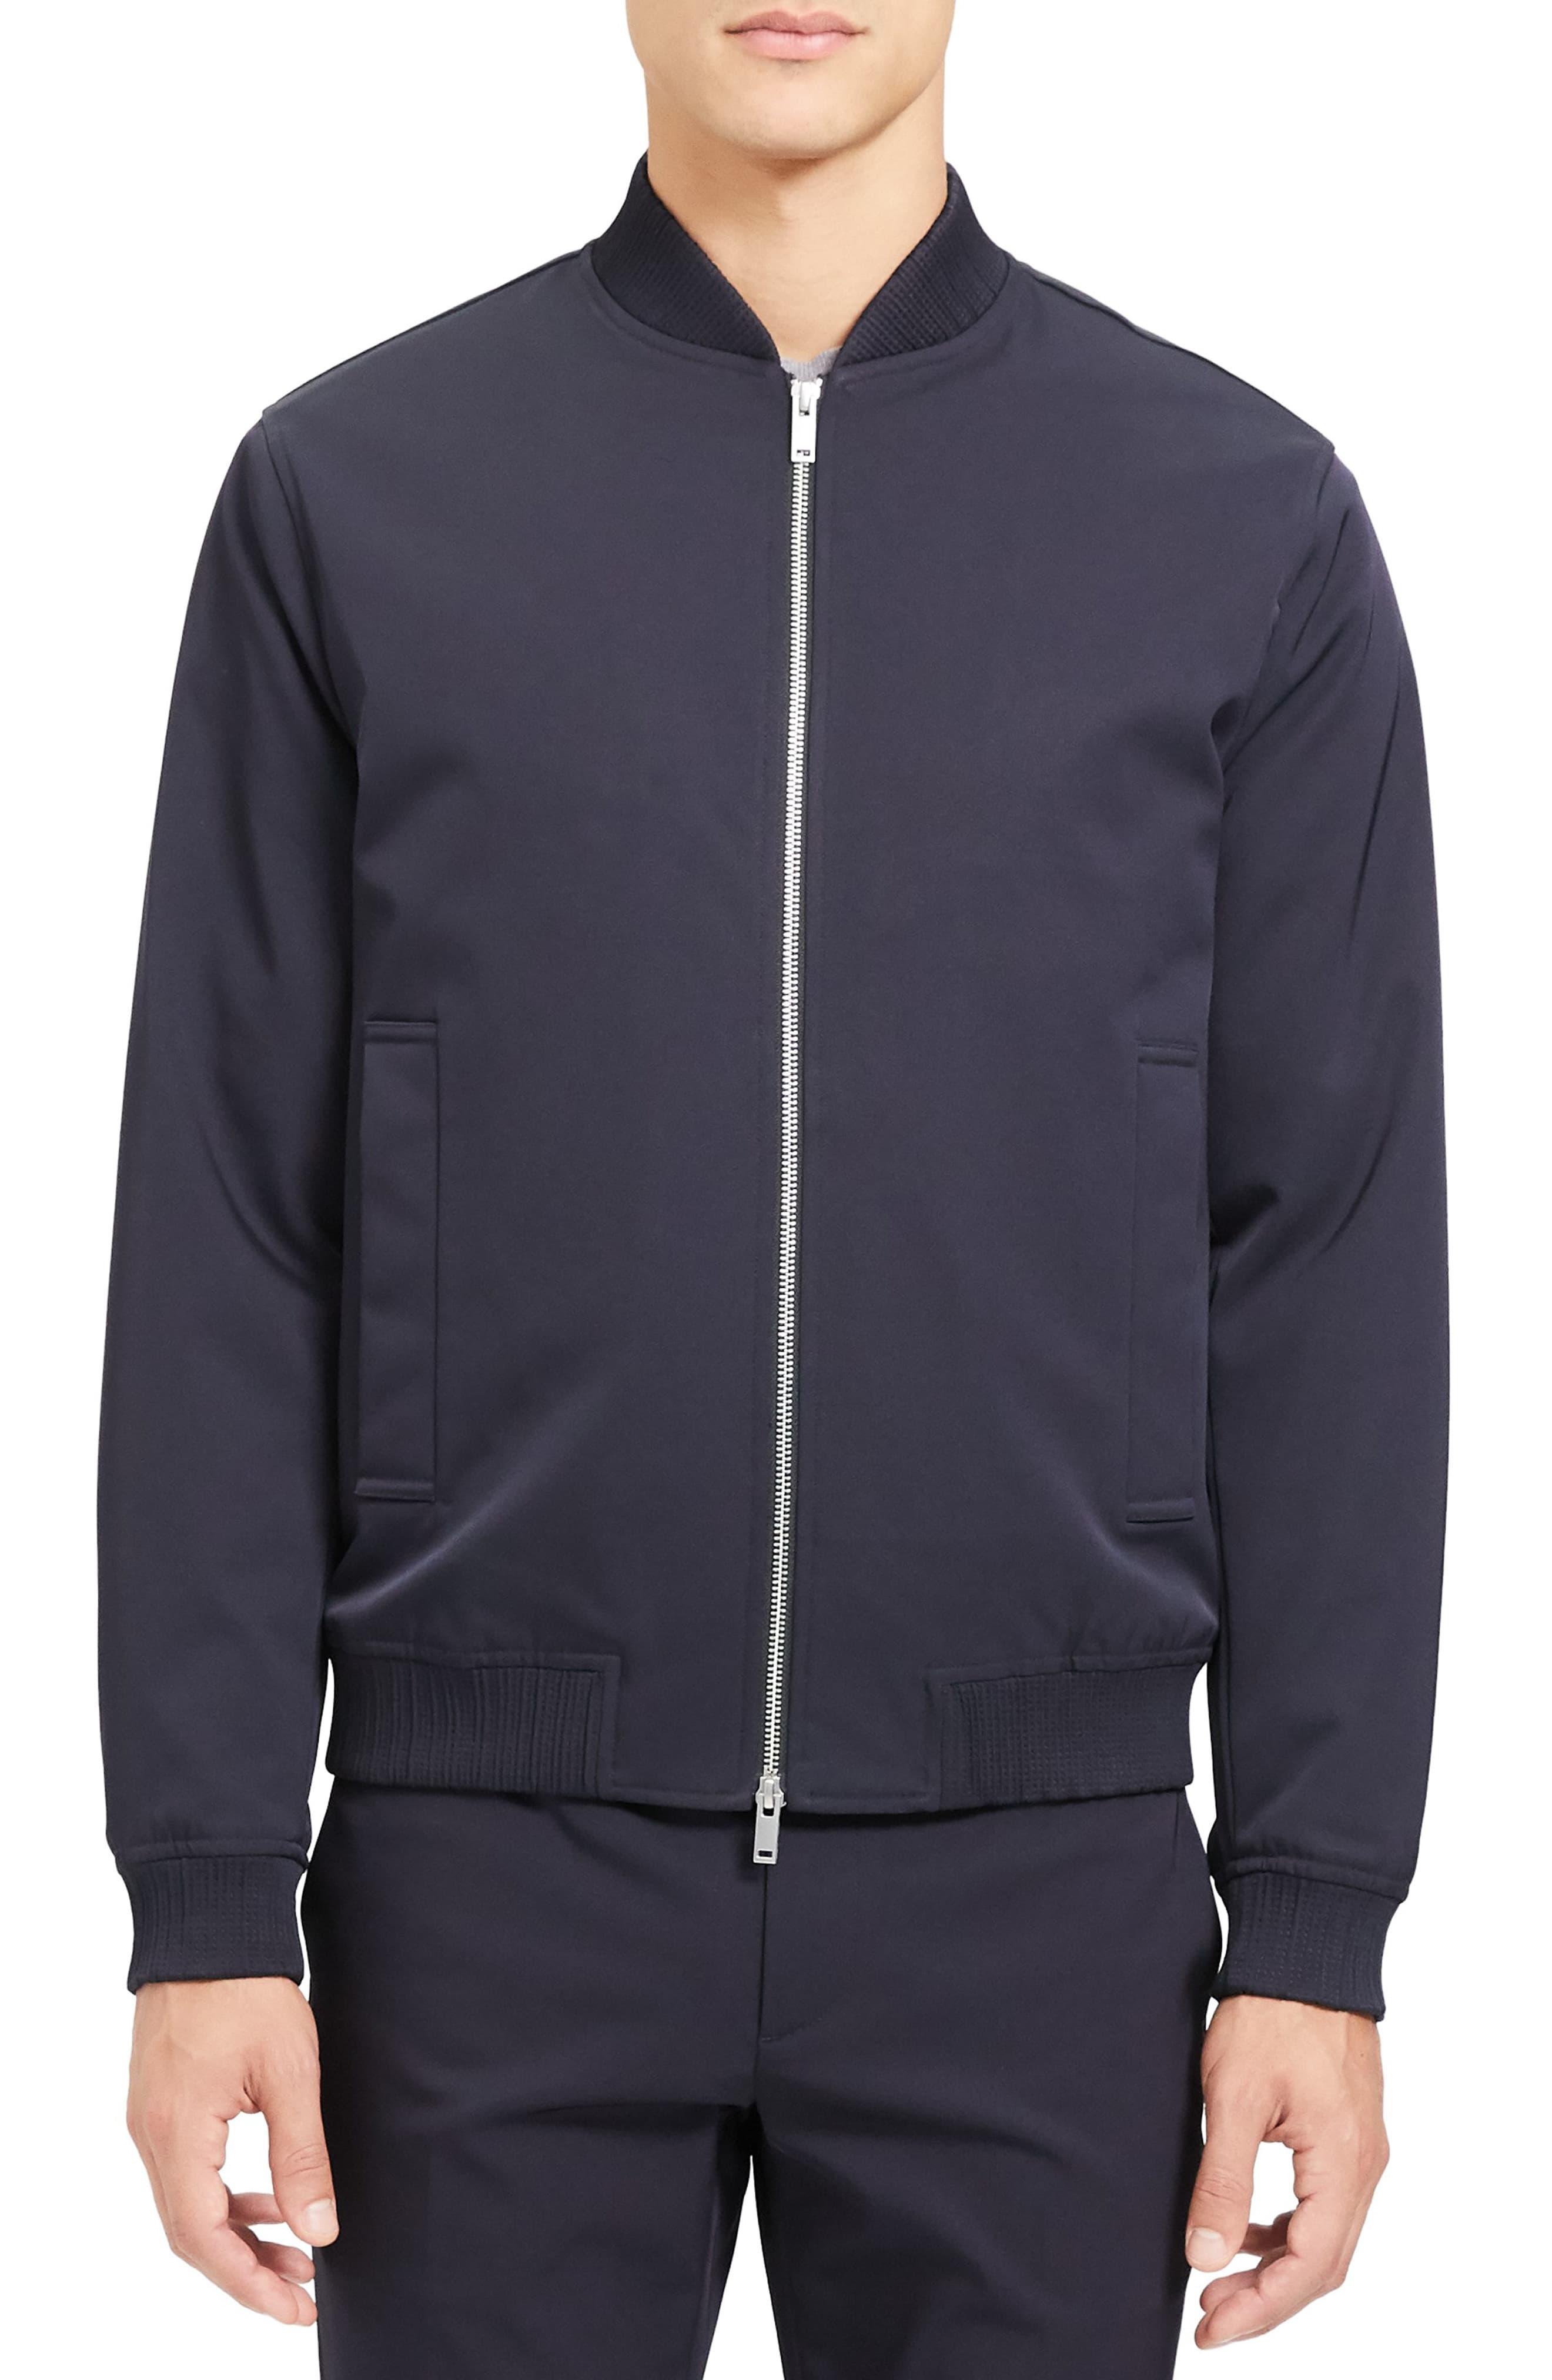 Theory James Nova Bomber Jacket in Navy (Blue) for Men - Save 38% - Lyst